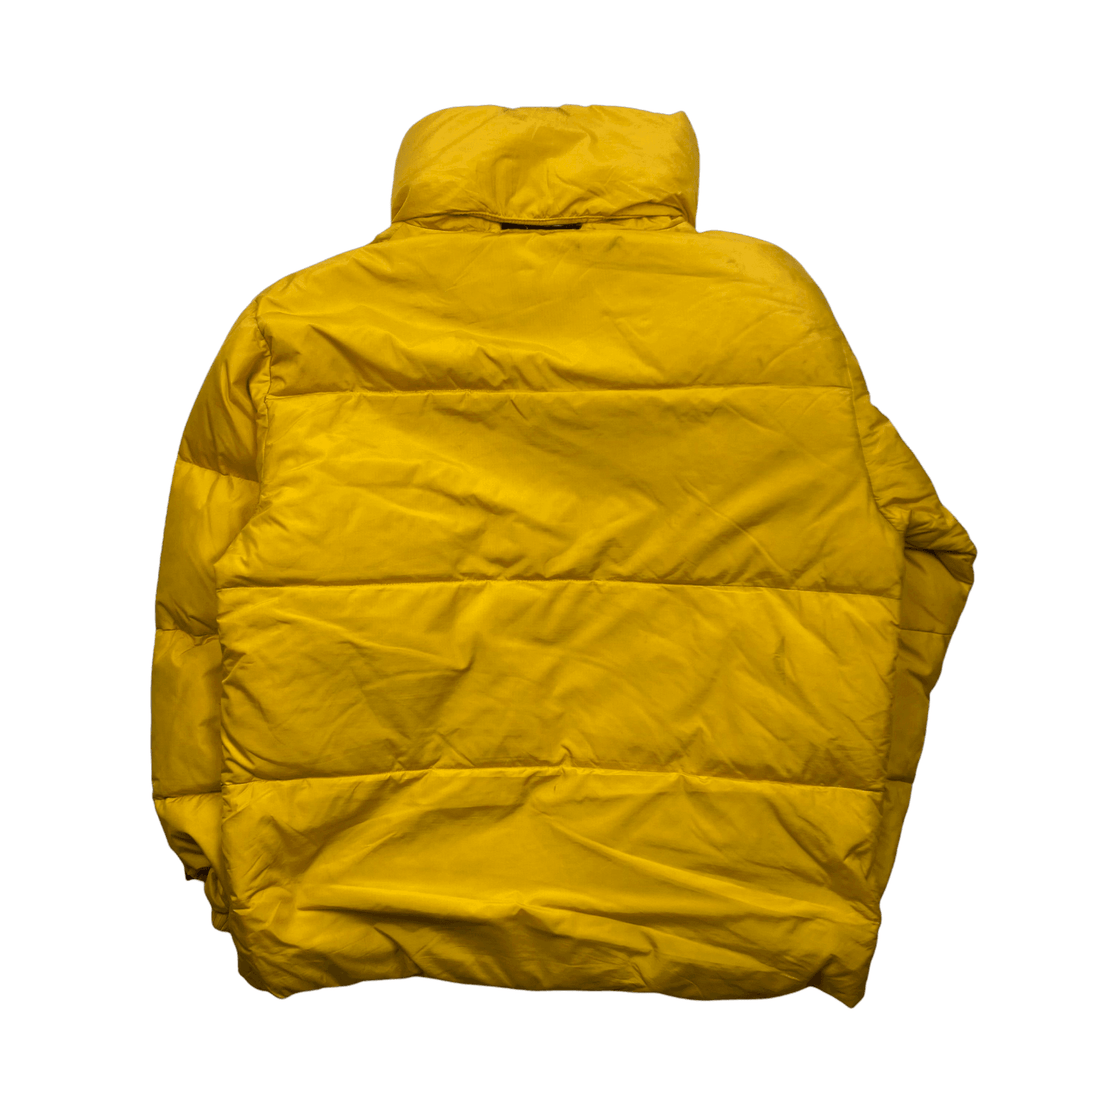 Vintage 90s Yellow Ralph Lauren Polo Jeans Spell-Out Puffer Coat/ Jacket - Large - The Streetwear Studio